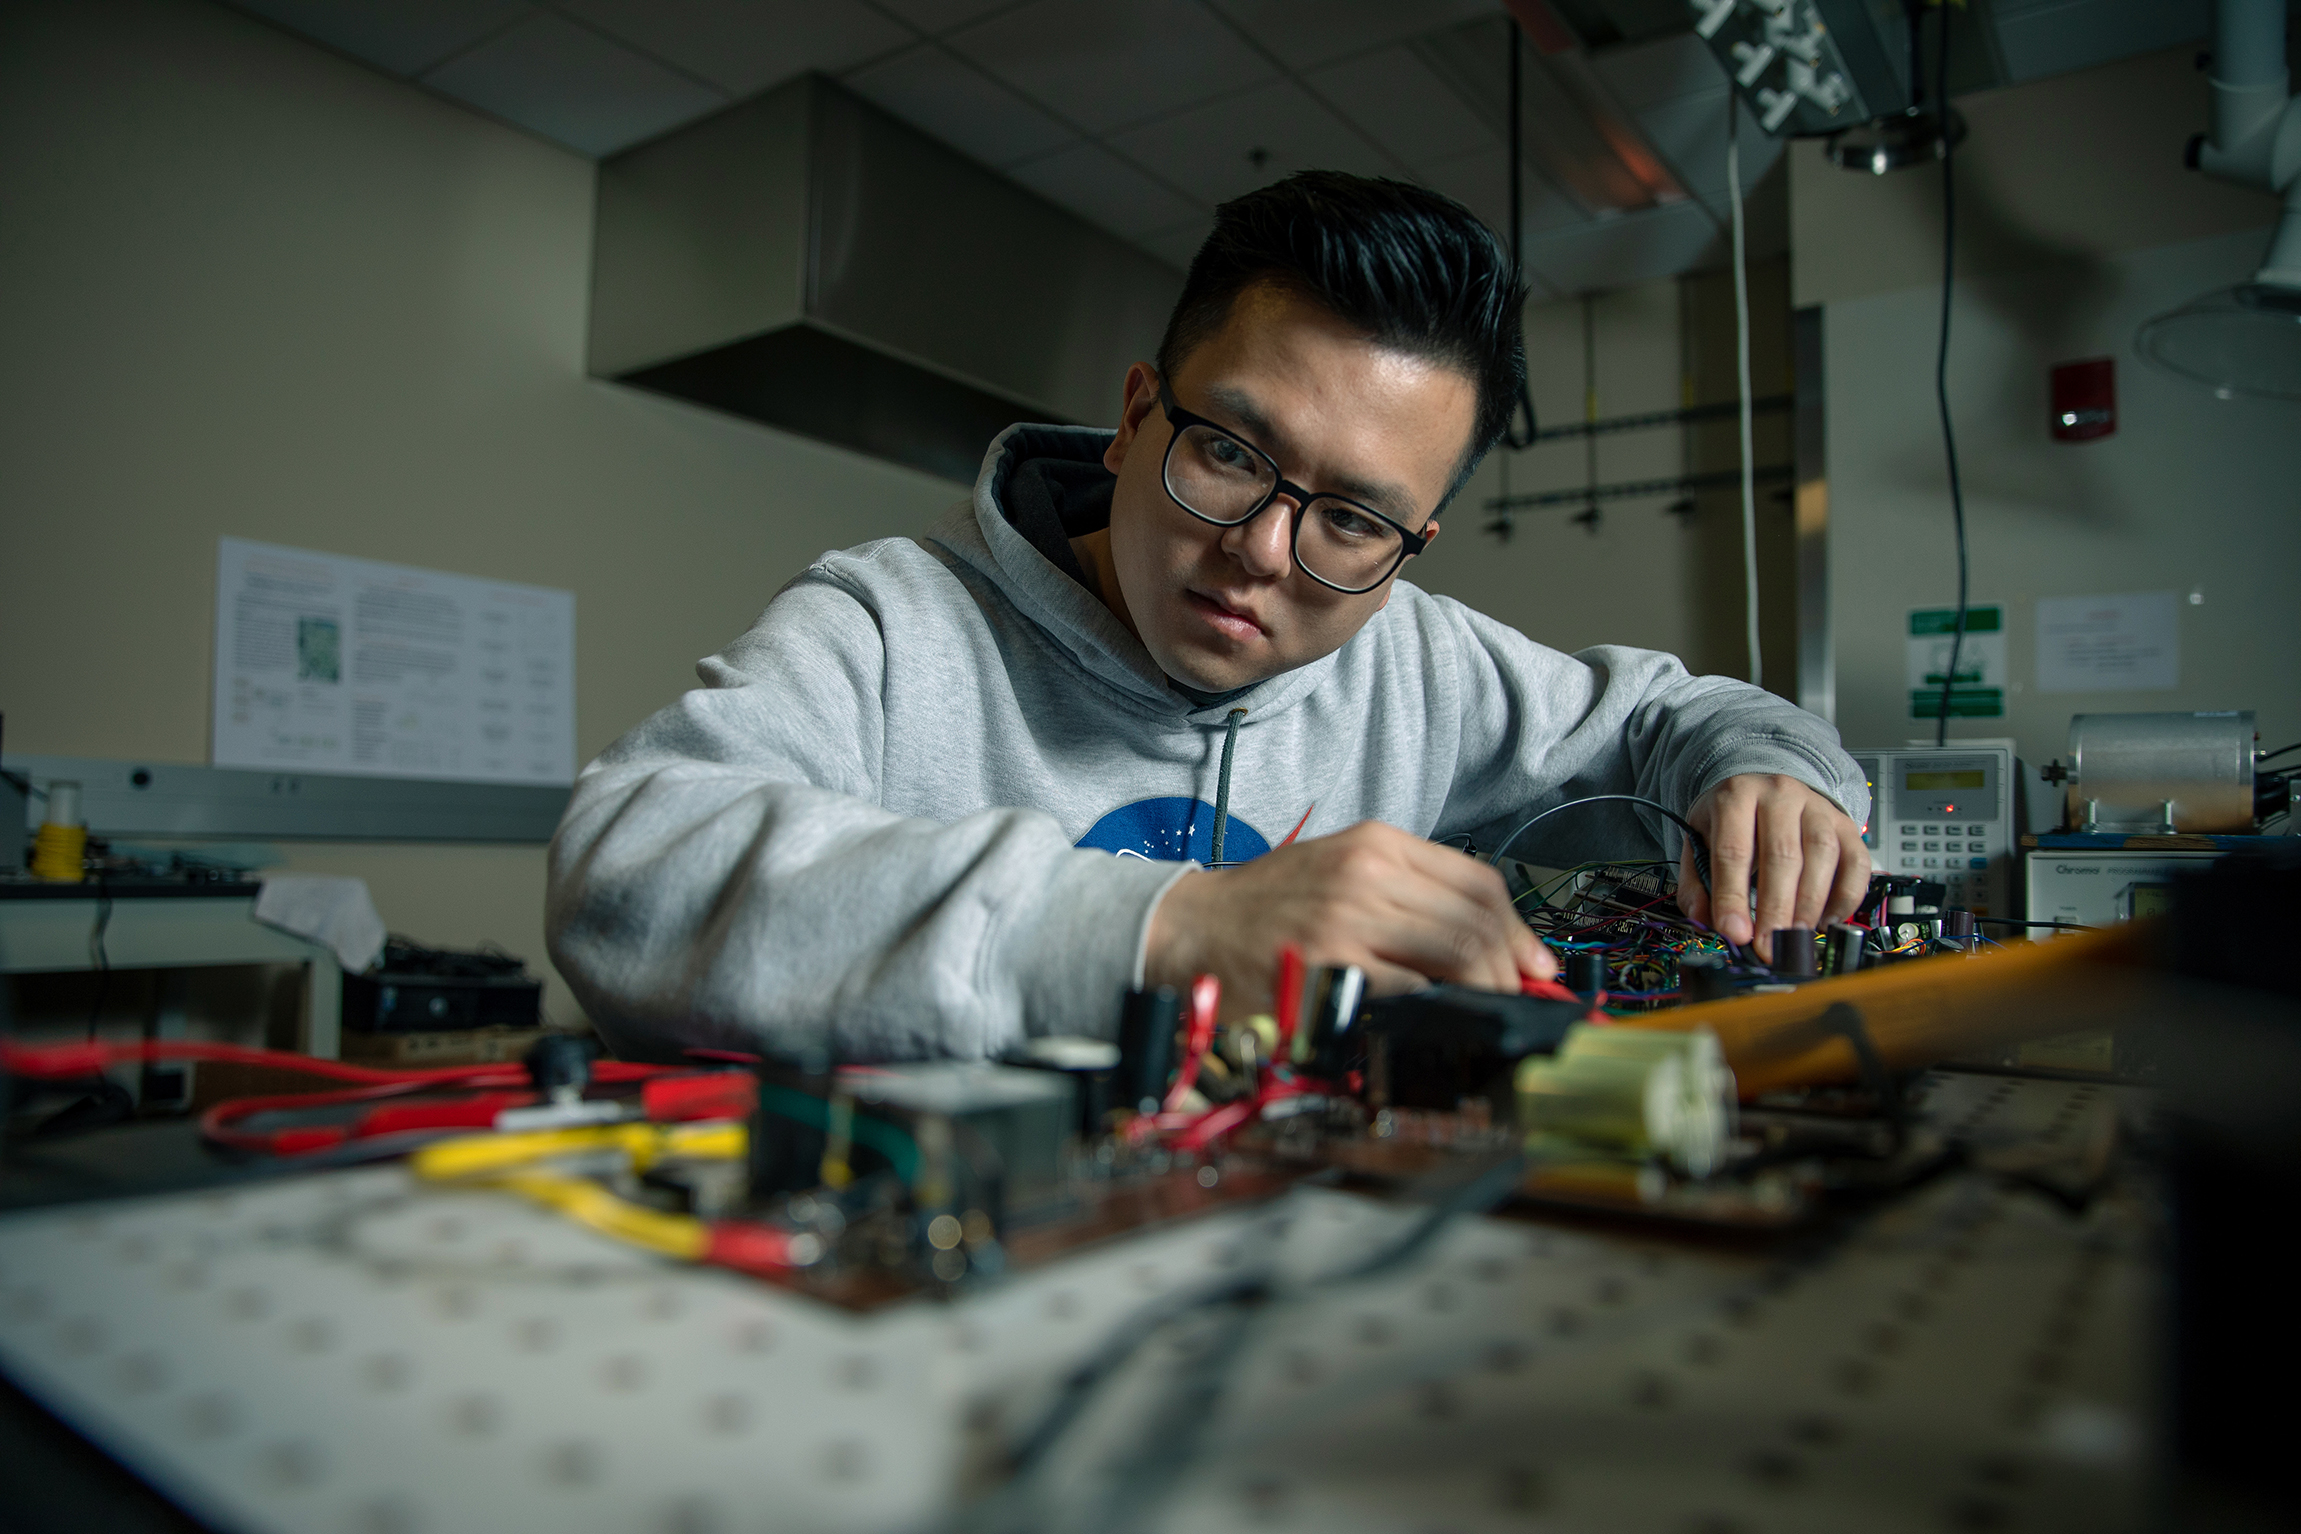 A student works with electronic equipment in a lab.